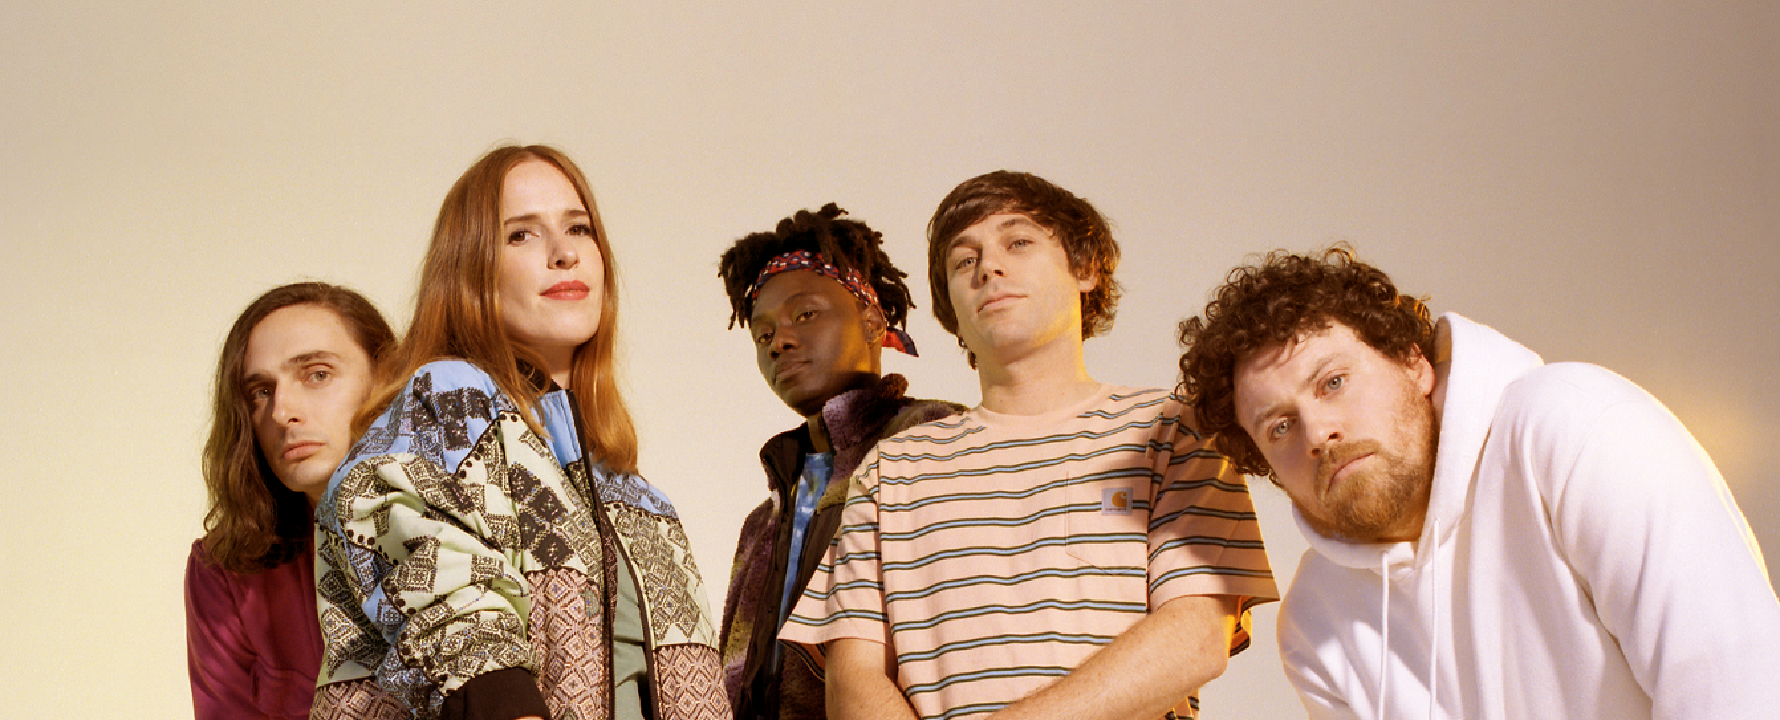 Promotional photograph of Metronomy.